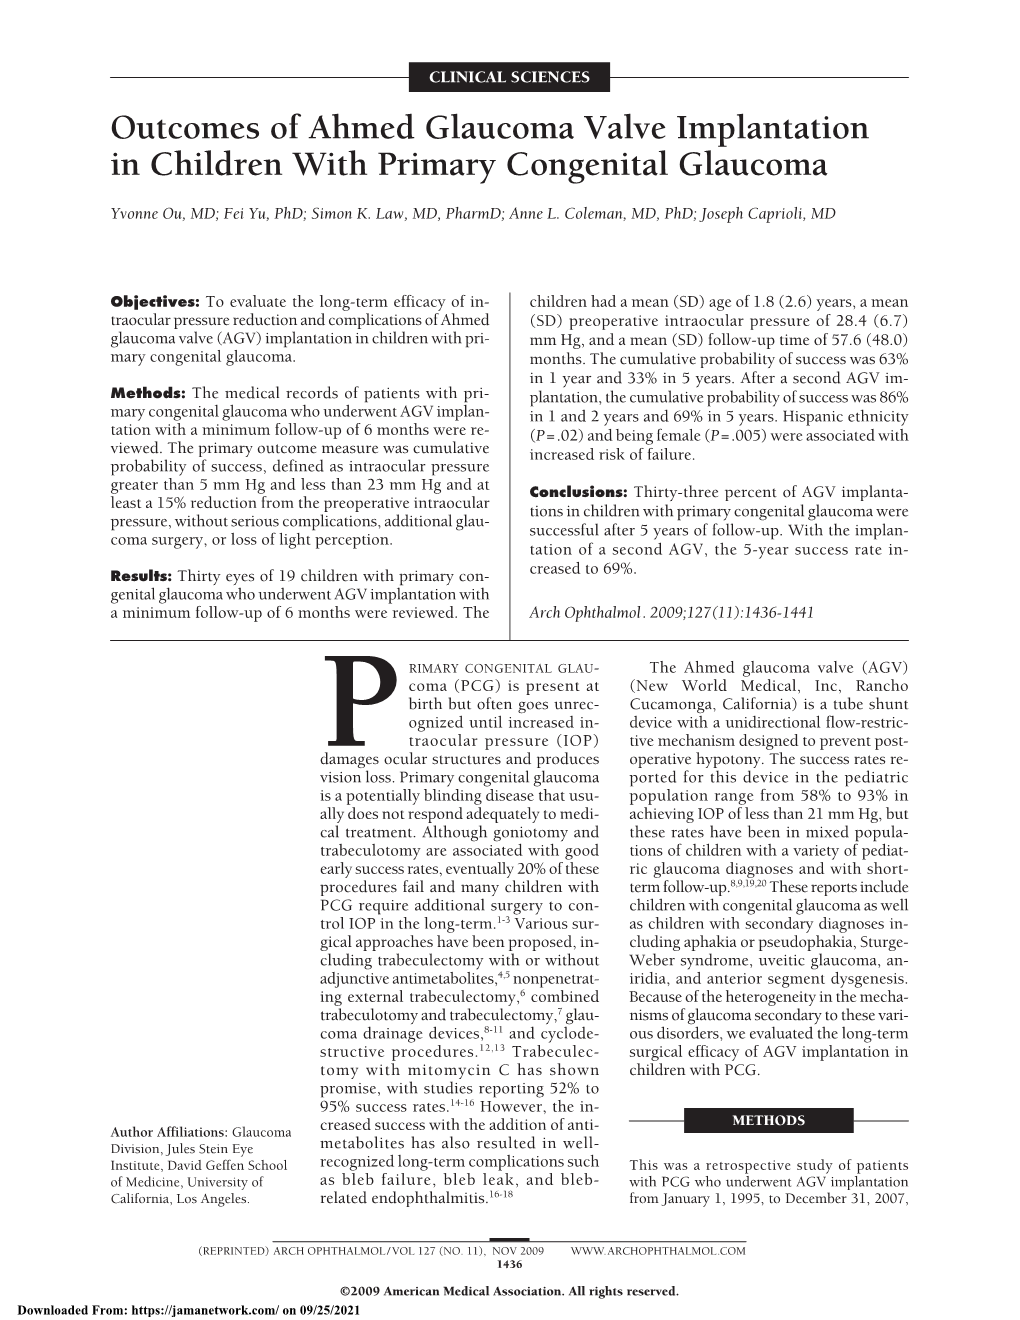 Outcomes of Ahmed Glaucoma Valve Implantation in Children with Primary Congenital Glaucoma